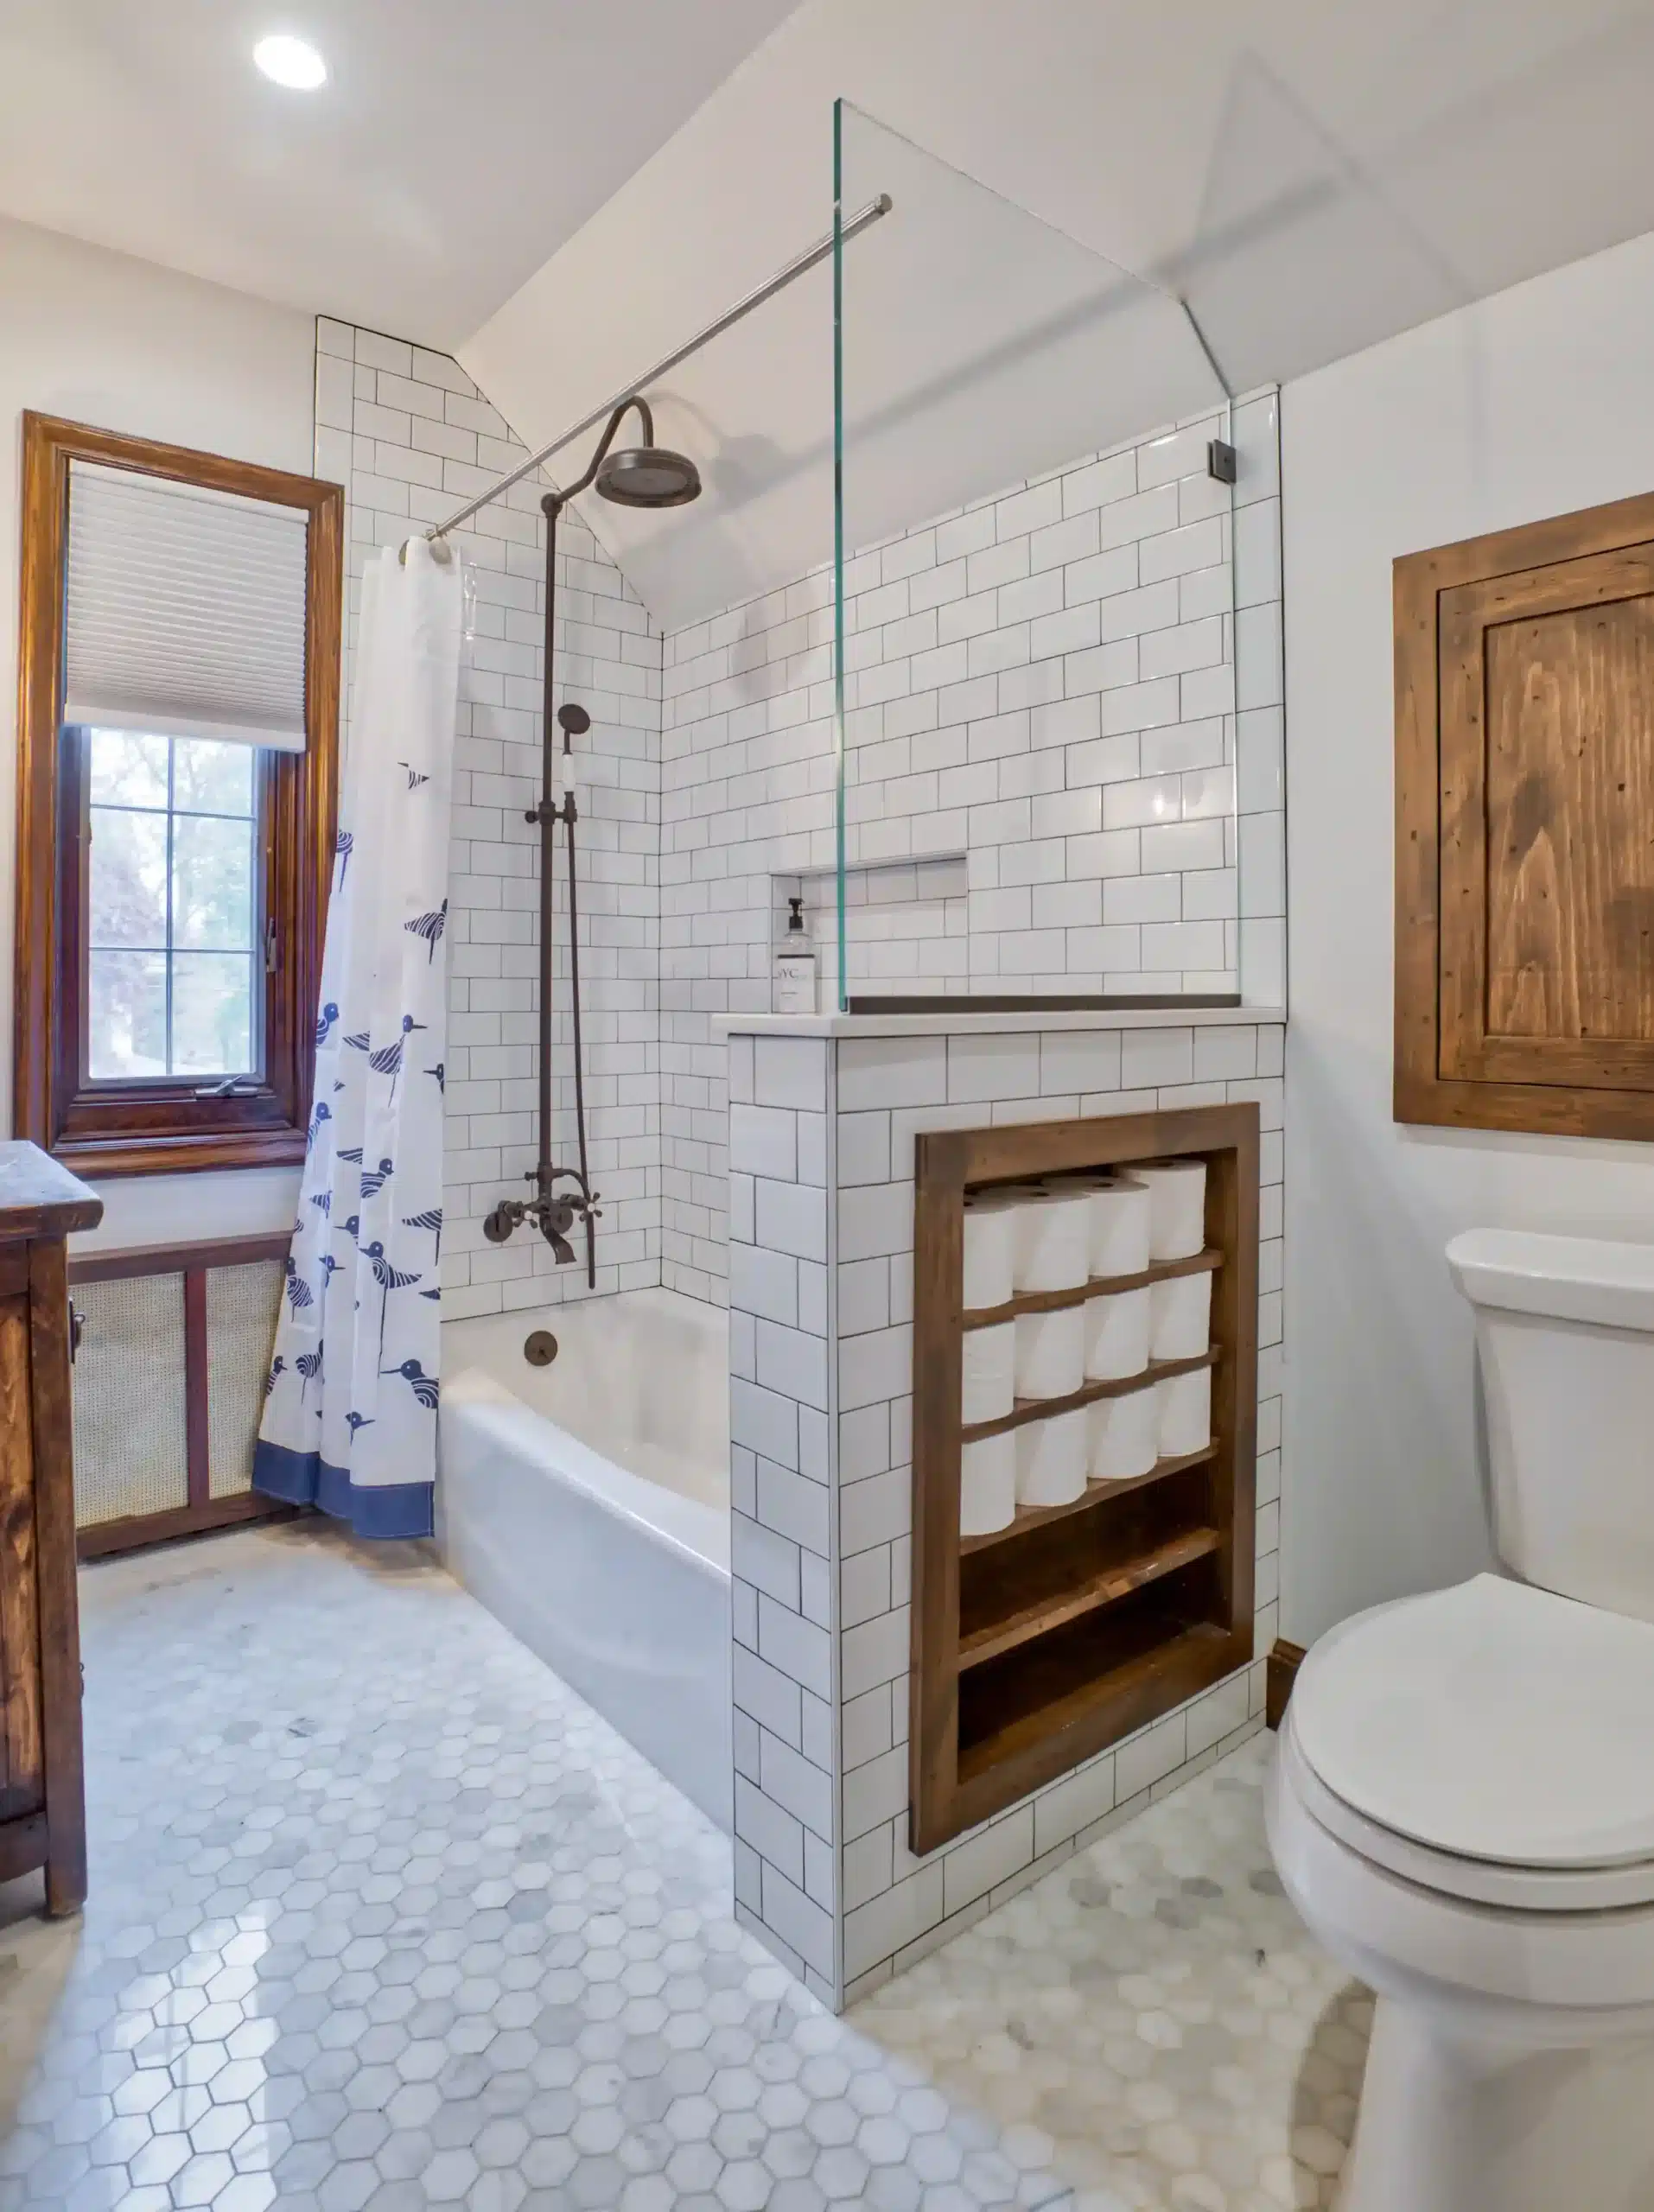 Bathroom remodel with white subway tile